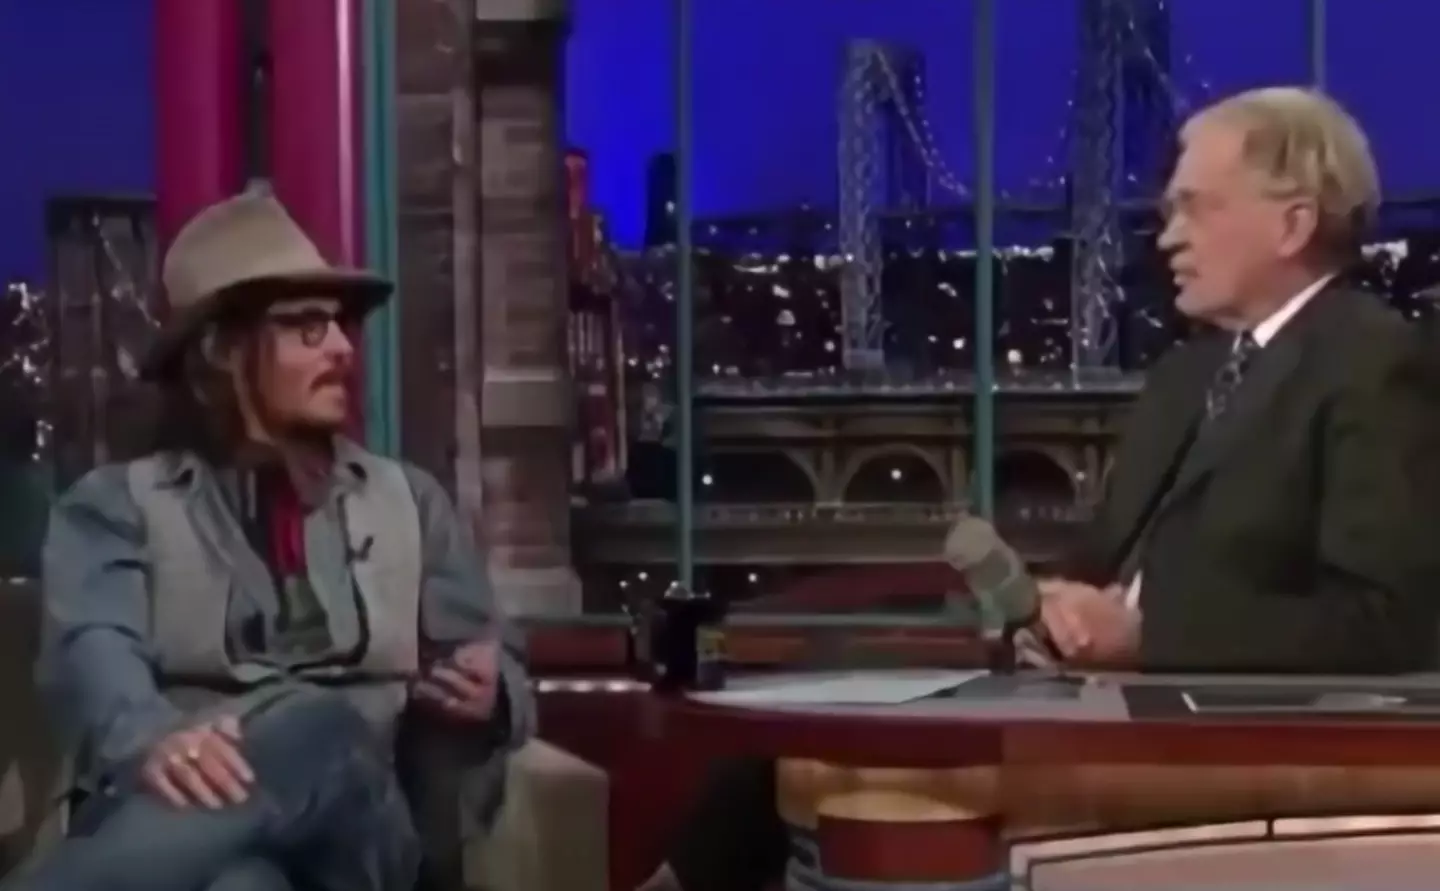 Johnny Depp didn't understand the joke, so Al Pacino kept telling it over and over again.